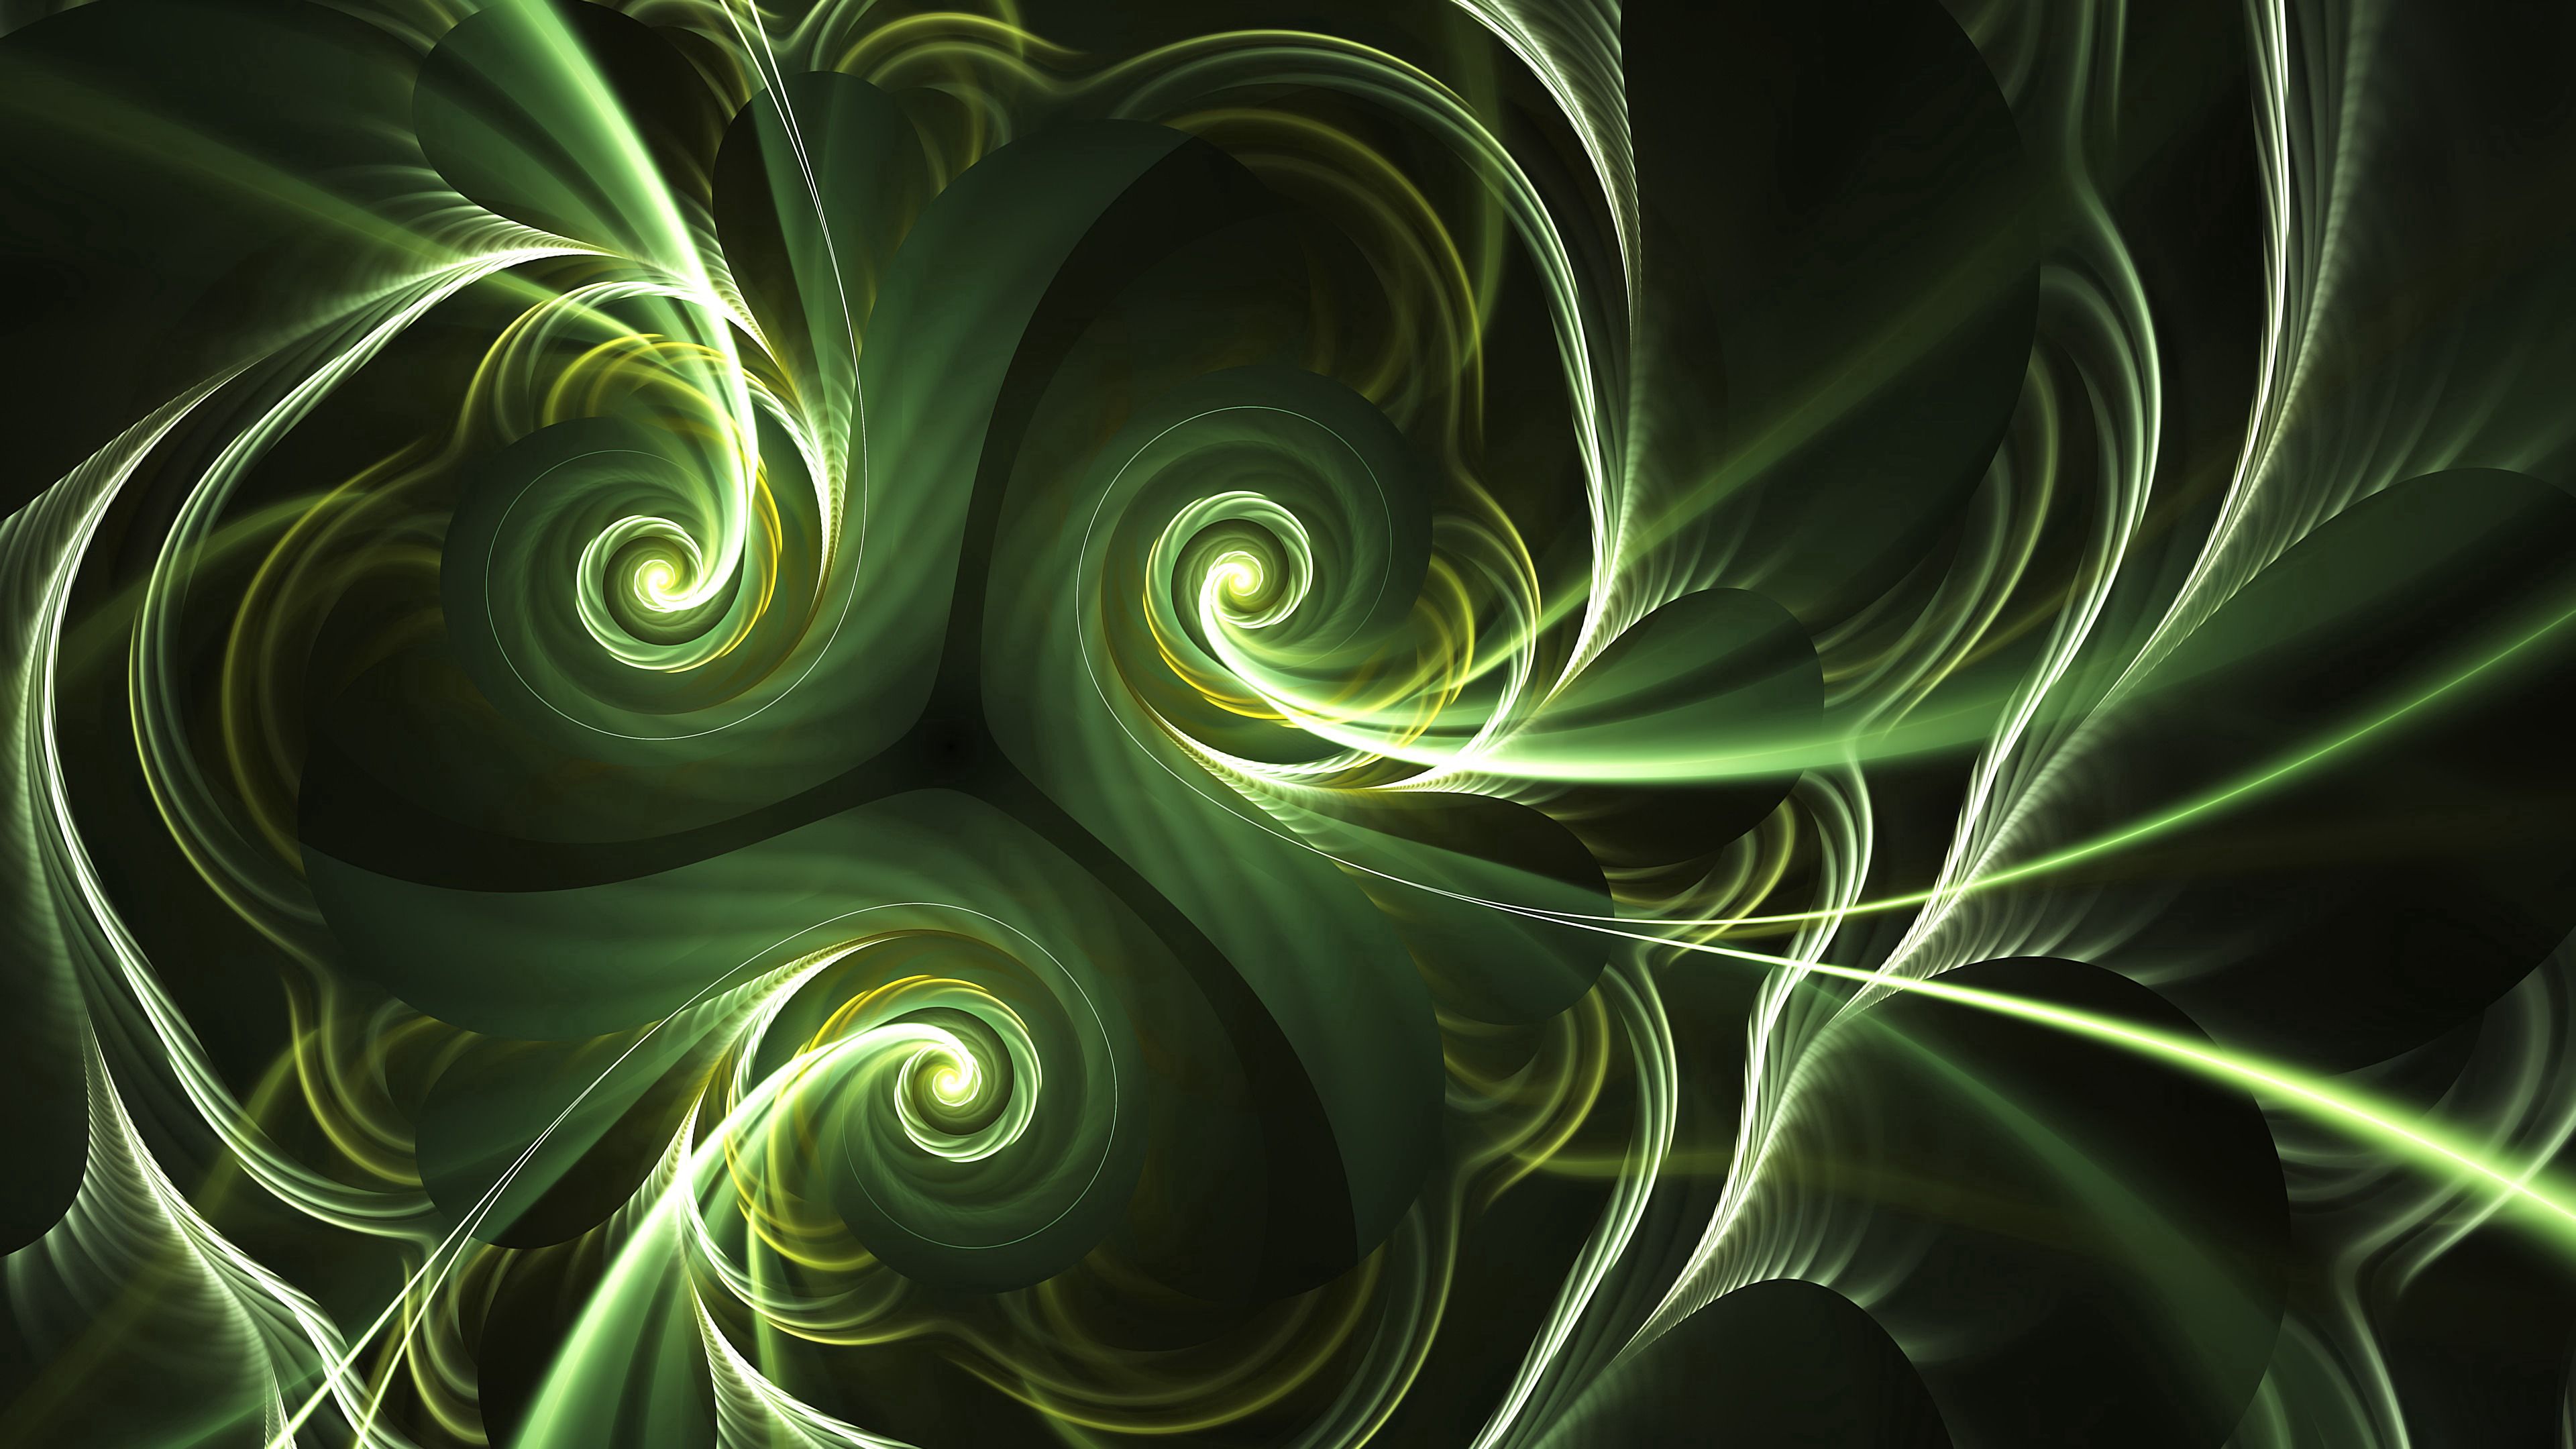 154332 2560x1080 PC pictures for free, download glow, fractal, abstract, spirals 2560x1080 wallpapers on your desktop